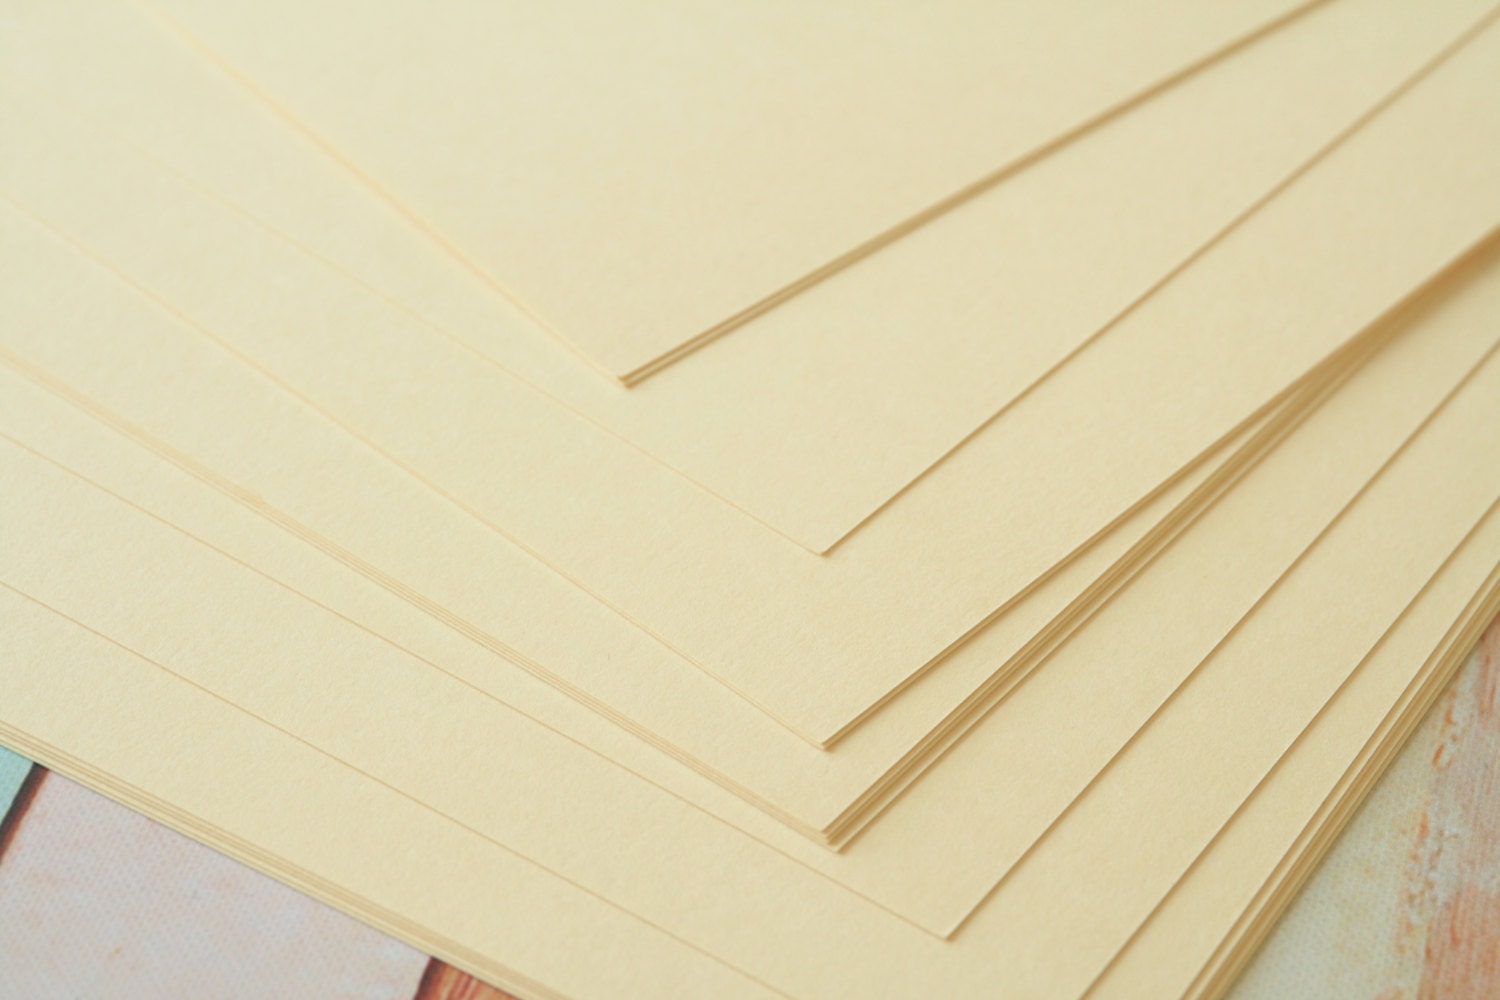 Craft Board - A4 50 Sheets 260 GSM